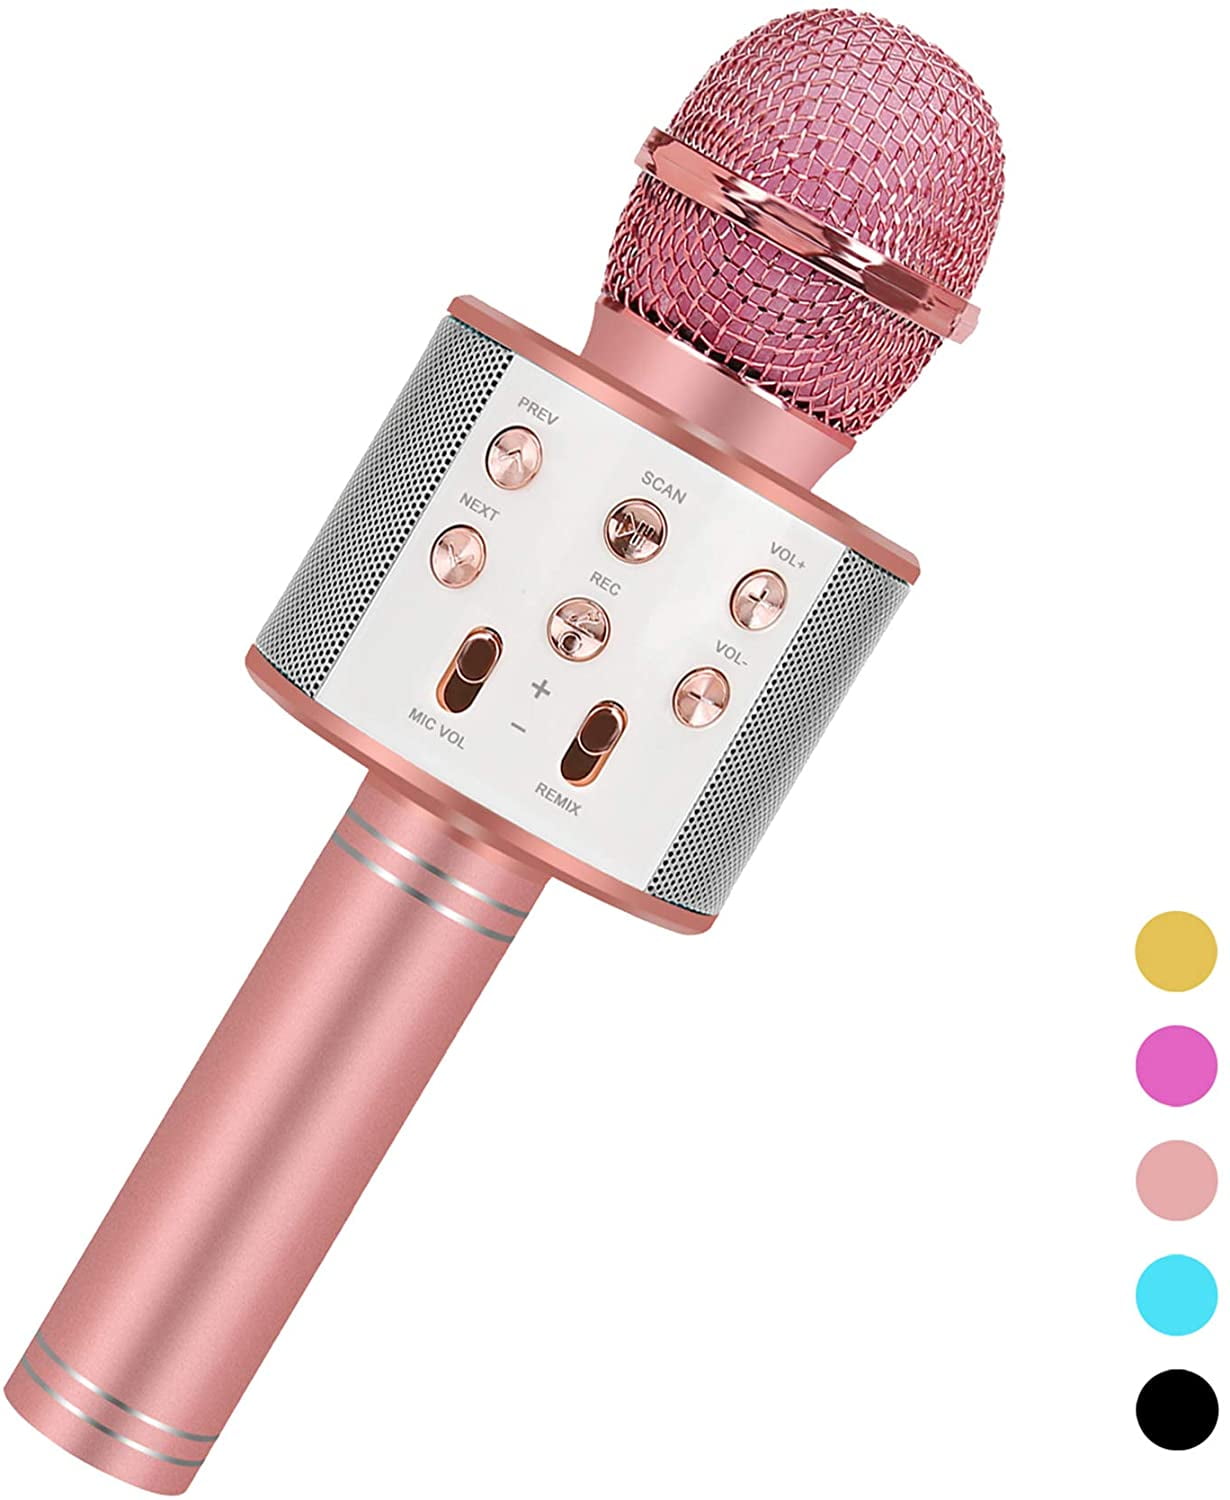 Best Gifts for 5-12 Year Old Girls ROKO Portable Handheld Karaoke Gifts Idea for Kids Toy Microphone for Kids Christmas Toys for 5-12 Year Old Girls Xmas Gifts for Kids Stocking Fillers Red 